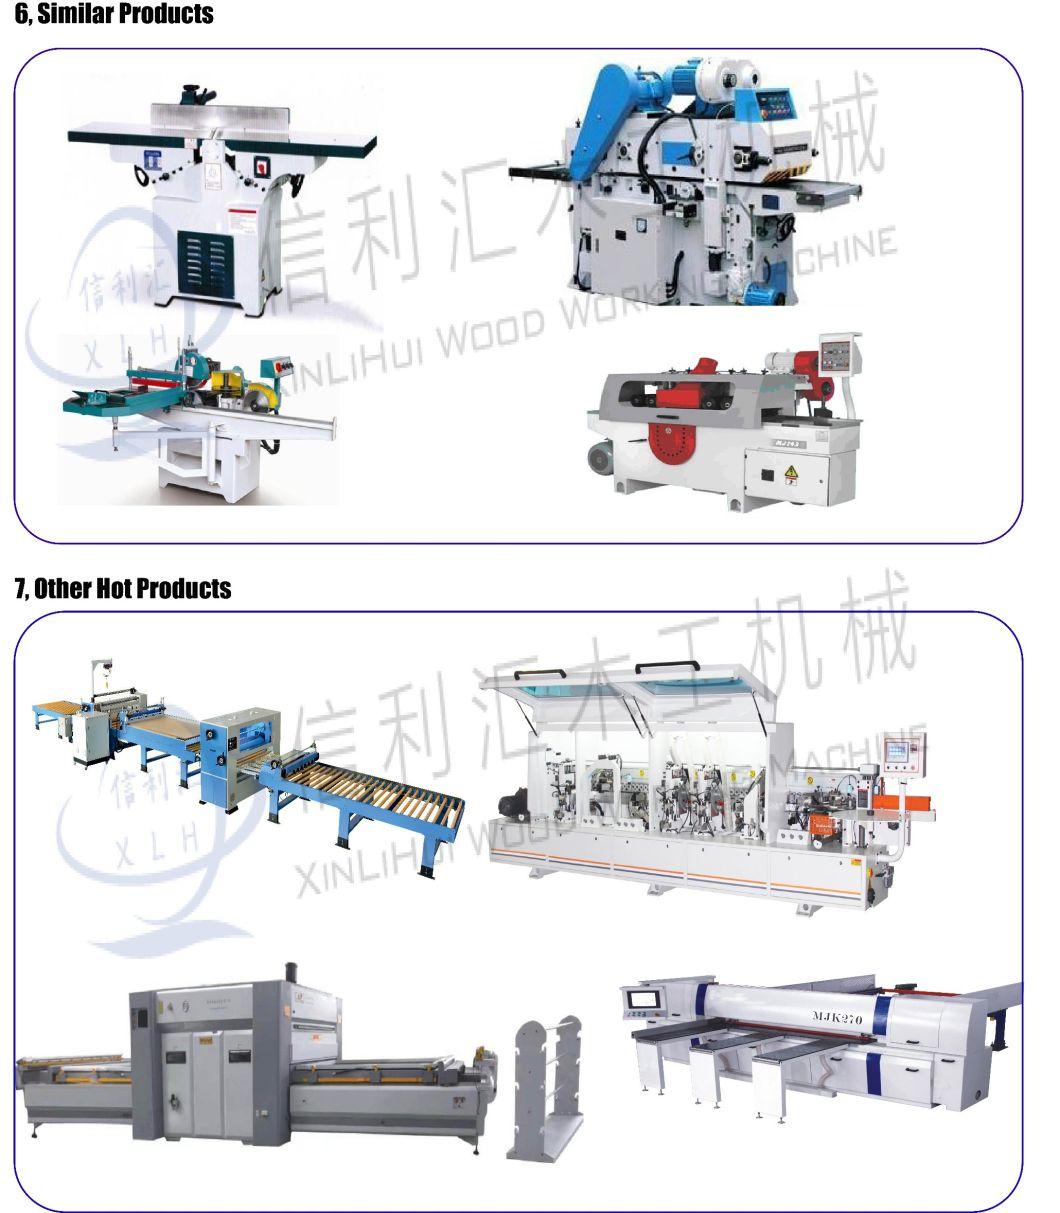 Heavy Duty Power Feeder for Woodworking for Spindle Moulder/ 4 Roller 8 Speed Woodworking Machine Heavy Ring Power Feeder/ Feeder Shaper in Router Machine